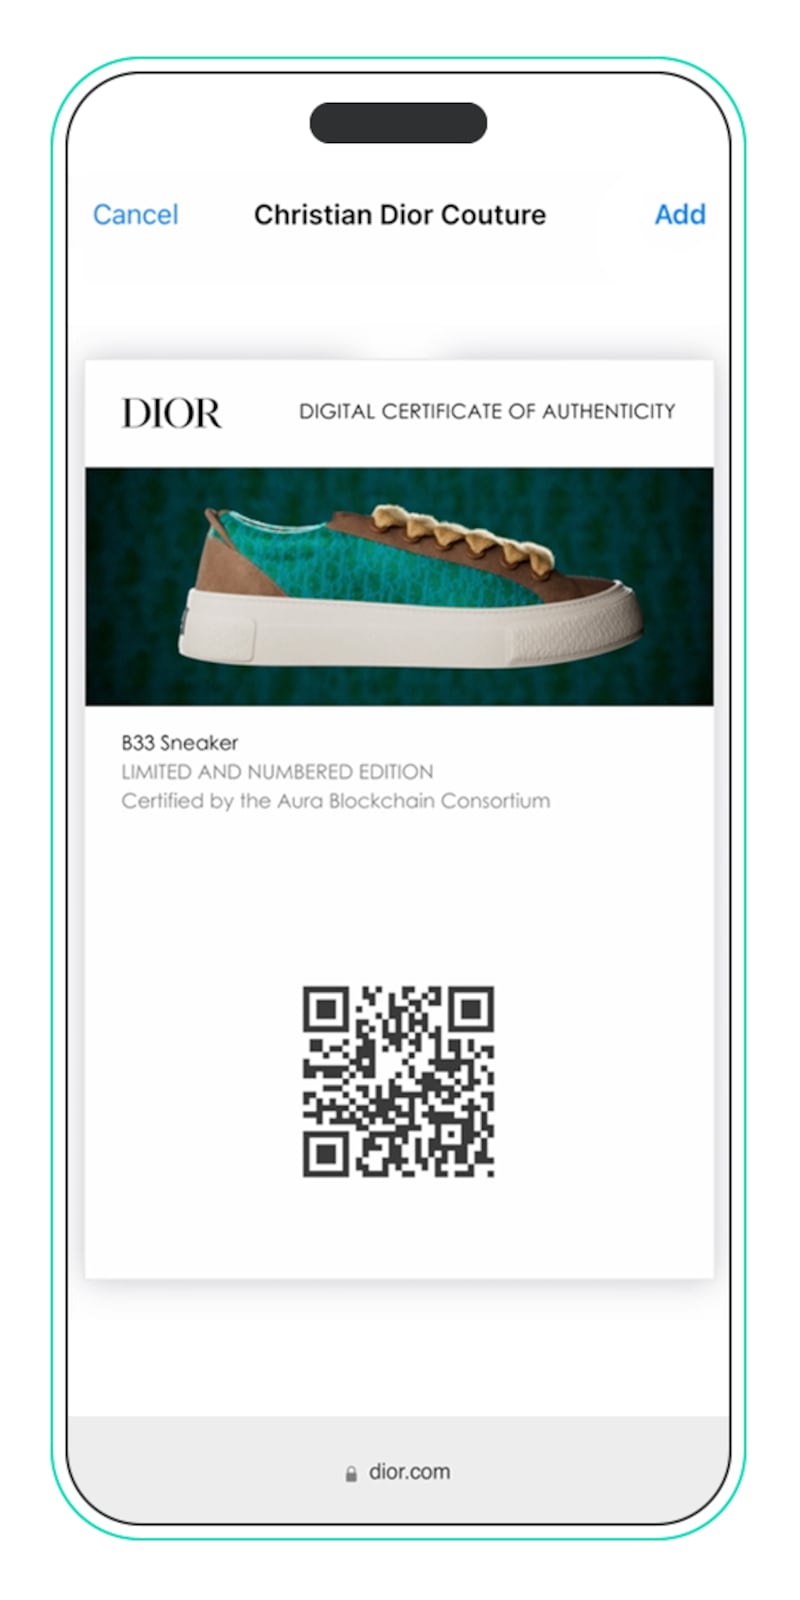 A picture of Dior's B33 sneaker appears in a phone interface featuring a QR code.